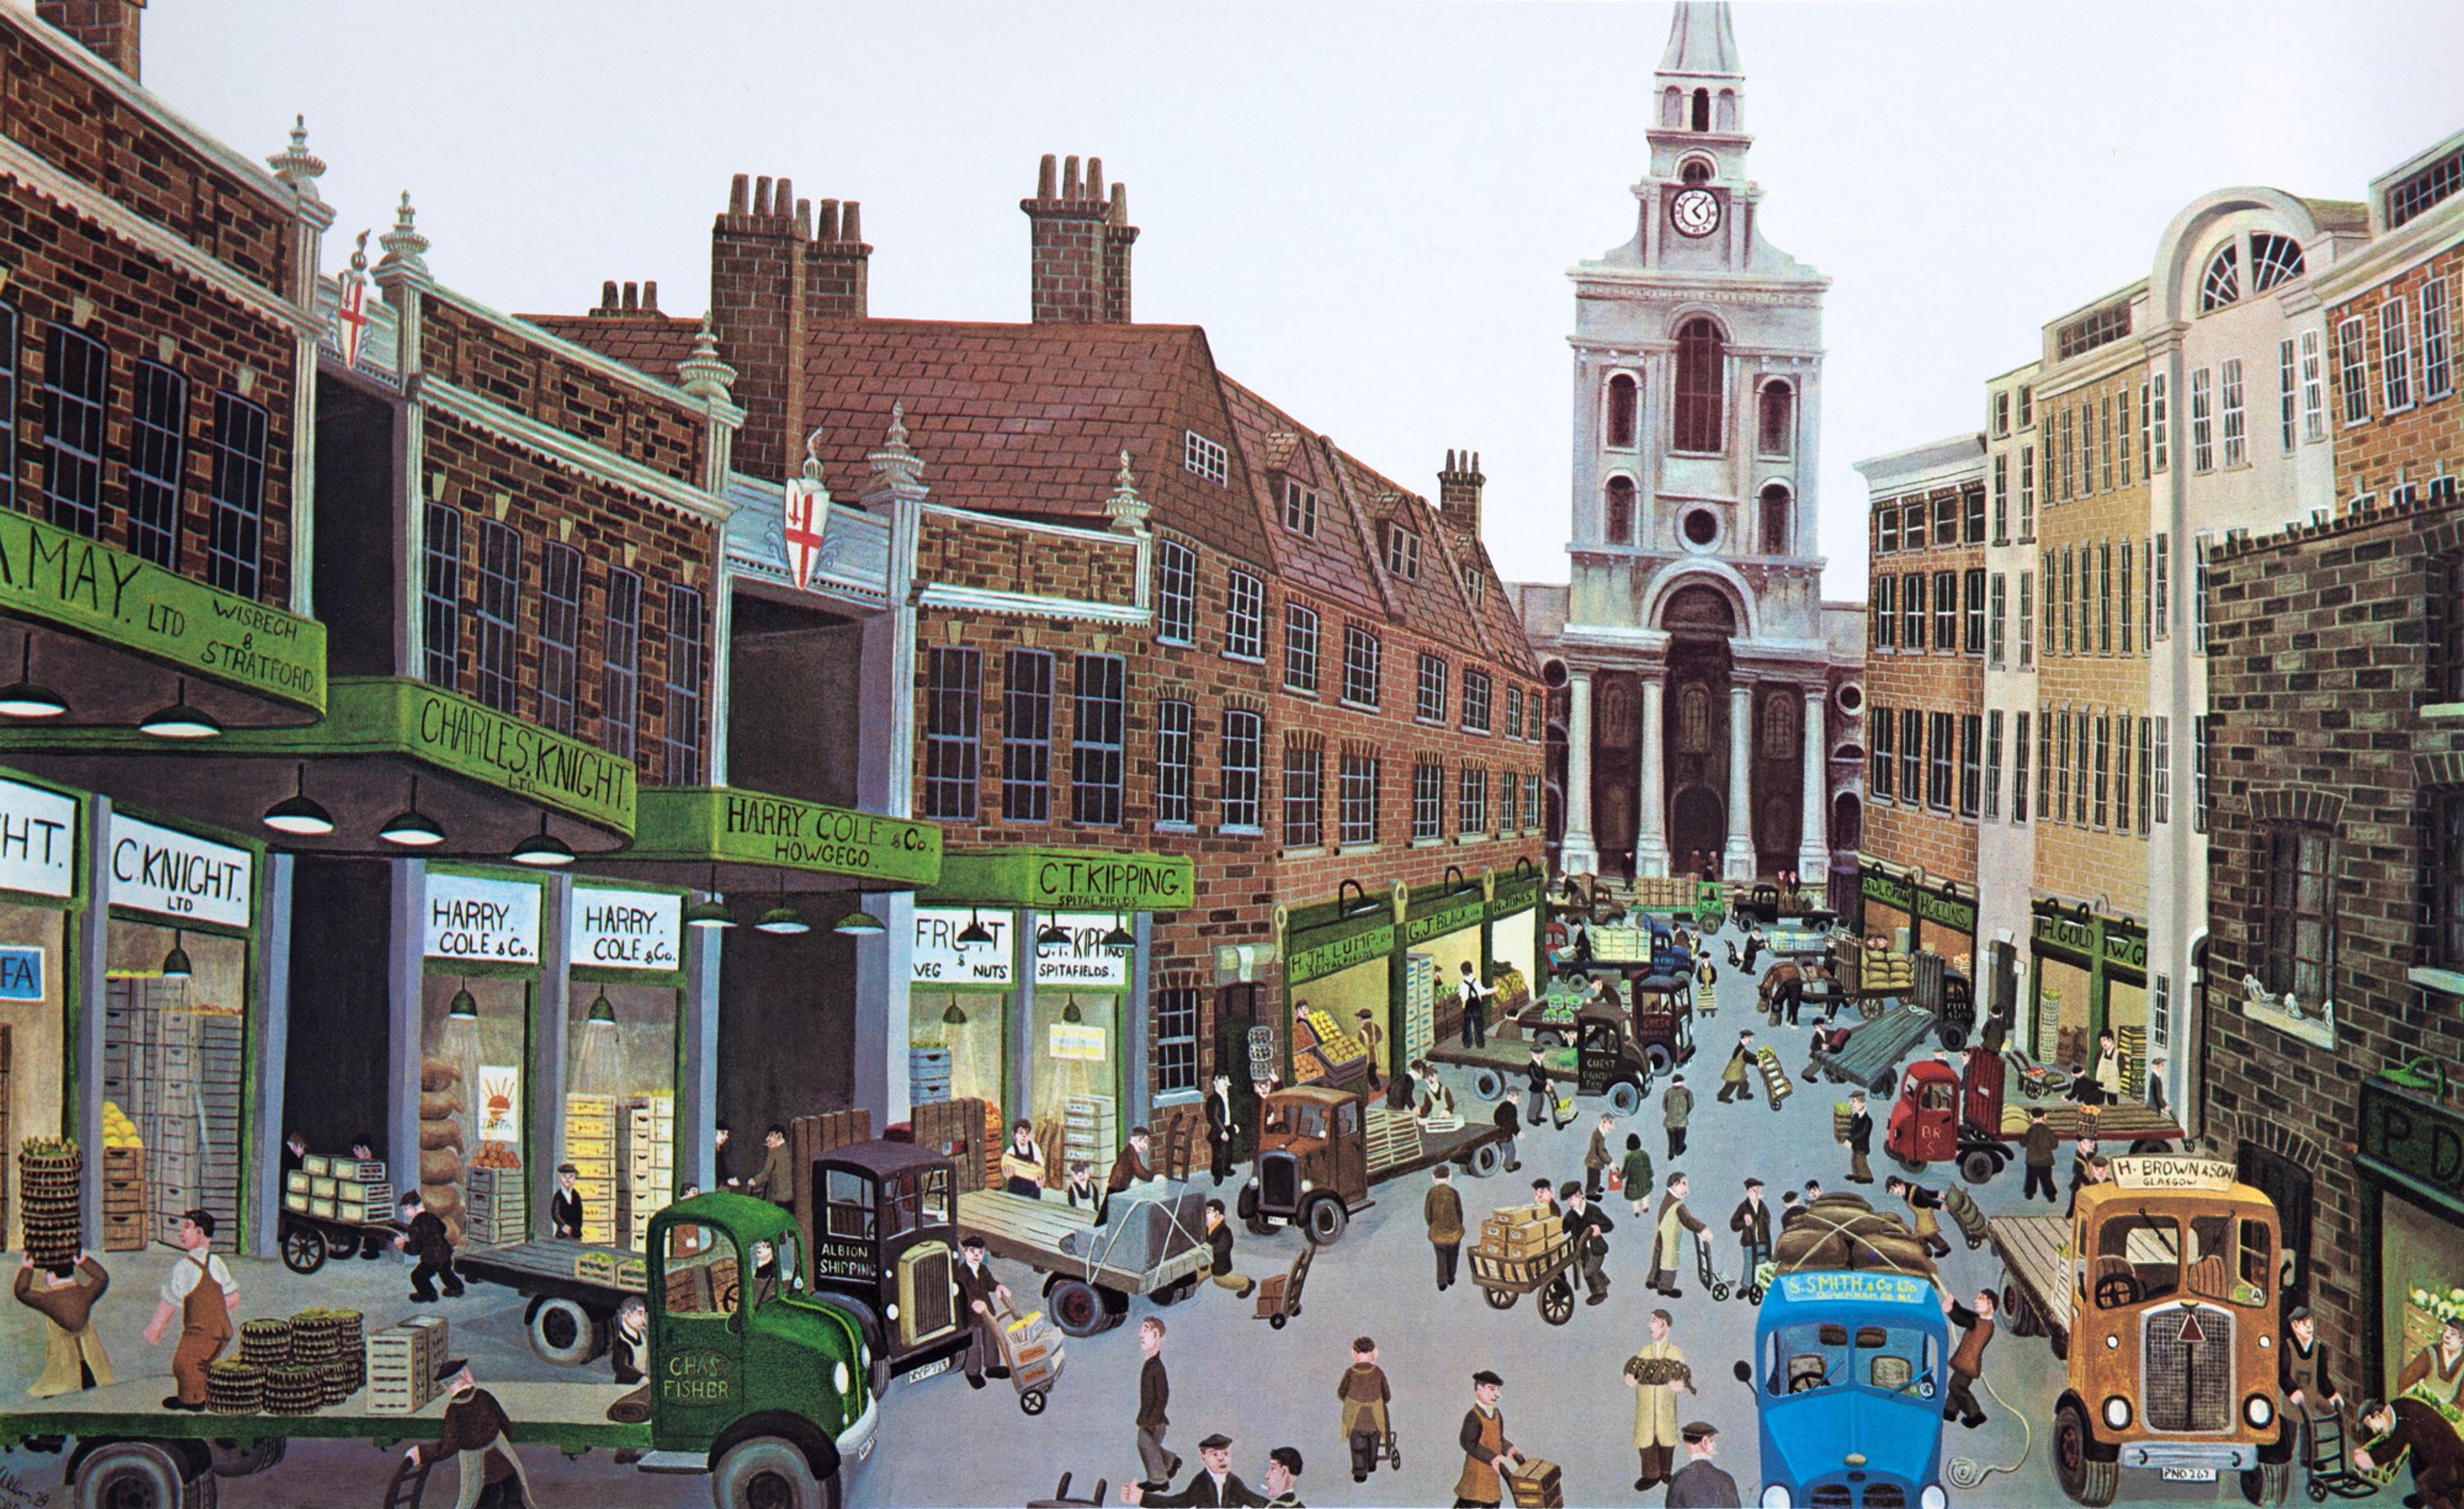 An illustration of a busy street scene, lot of menu unloading goods and produce from flat bed trucks into shops